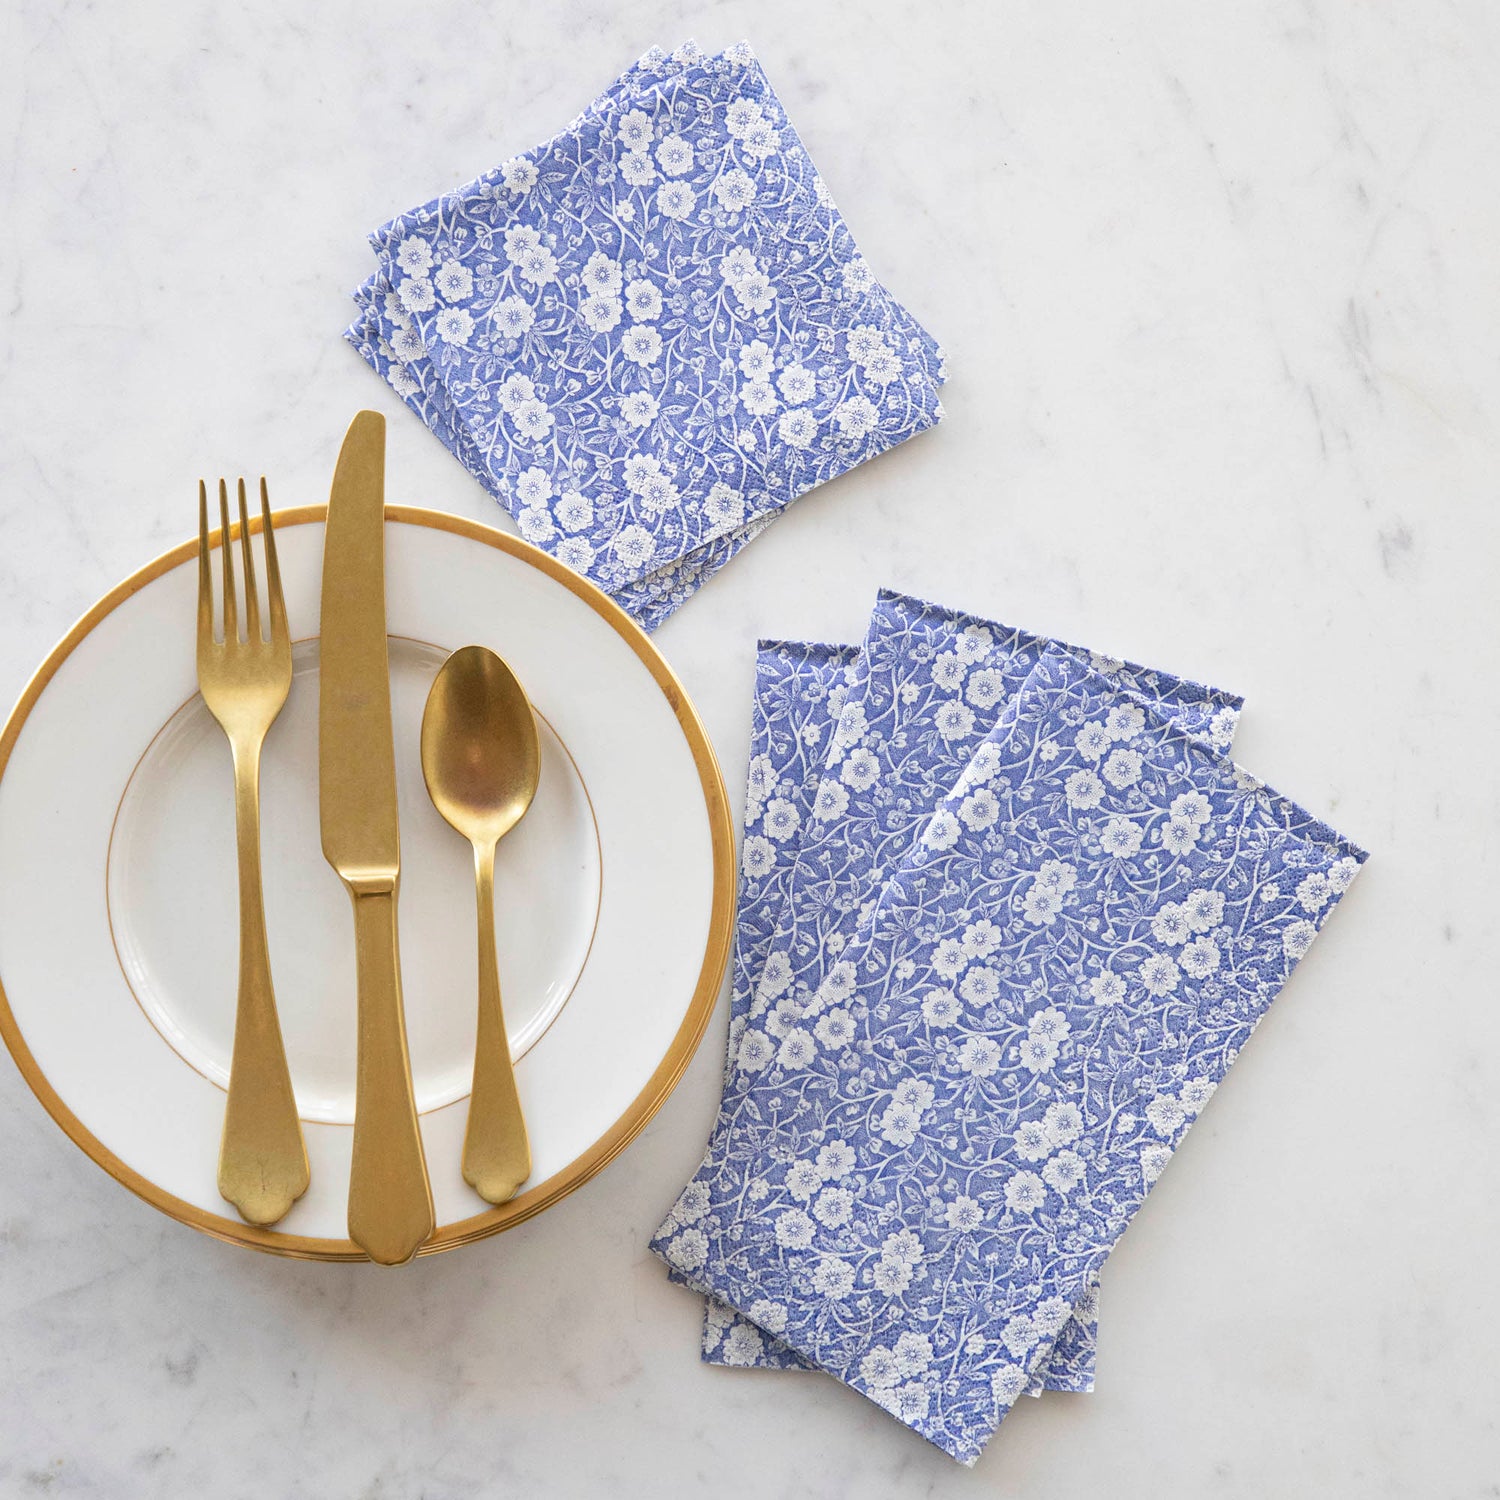 A stack of three Blue Calico Guest Napkins and a stack of three Blue Calico Cocktail Napkins fanned out next to a gold-rimmed plate with gold flatware.